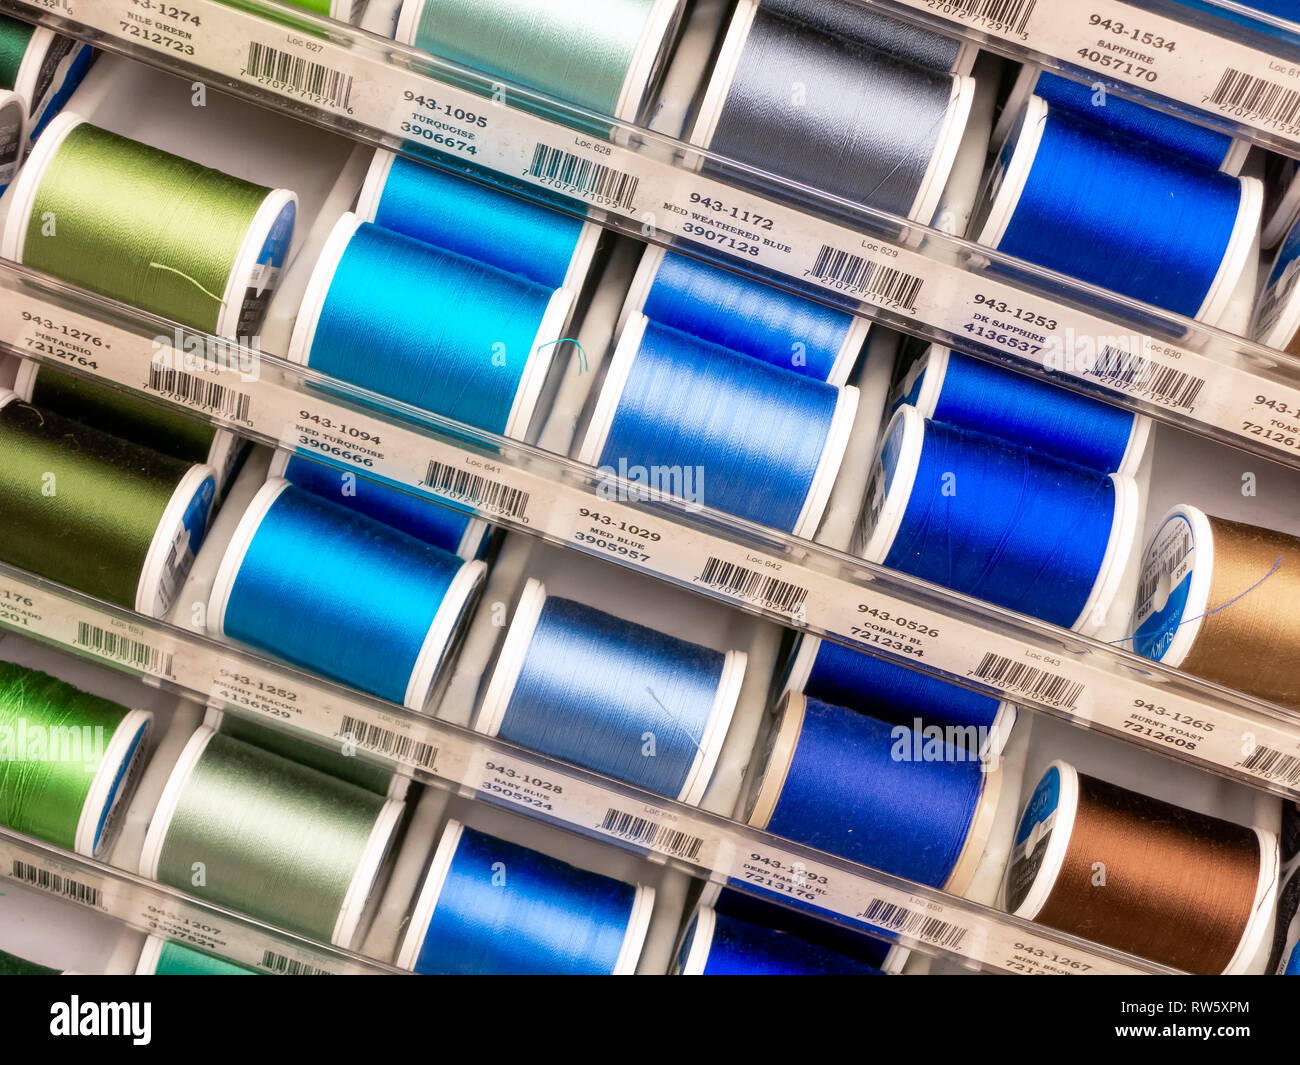 ST. PAUL, MN/USA - MARCH 3, 2019: Sulky of America spools of thread and trademark logo. Sulky is a manufacter of thread and craft supplies. Stock Photo